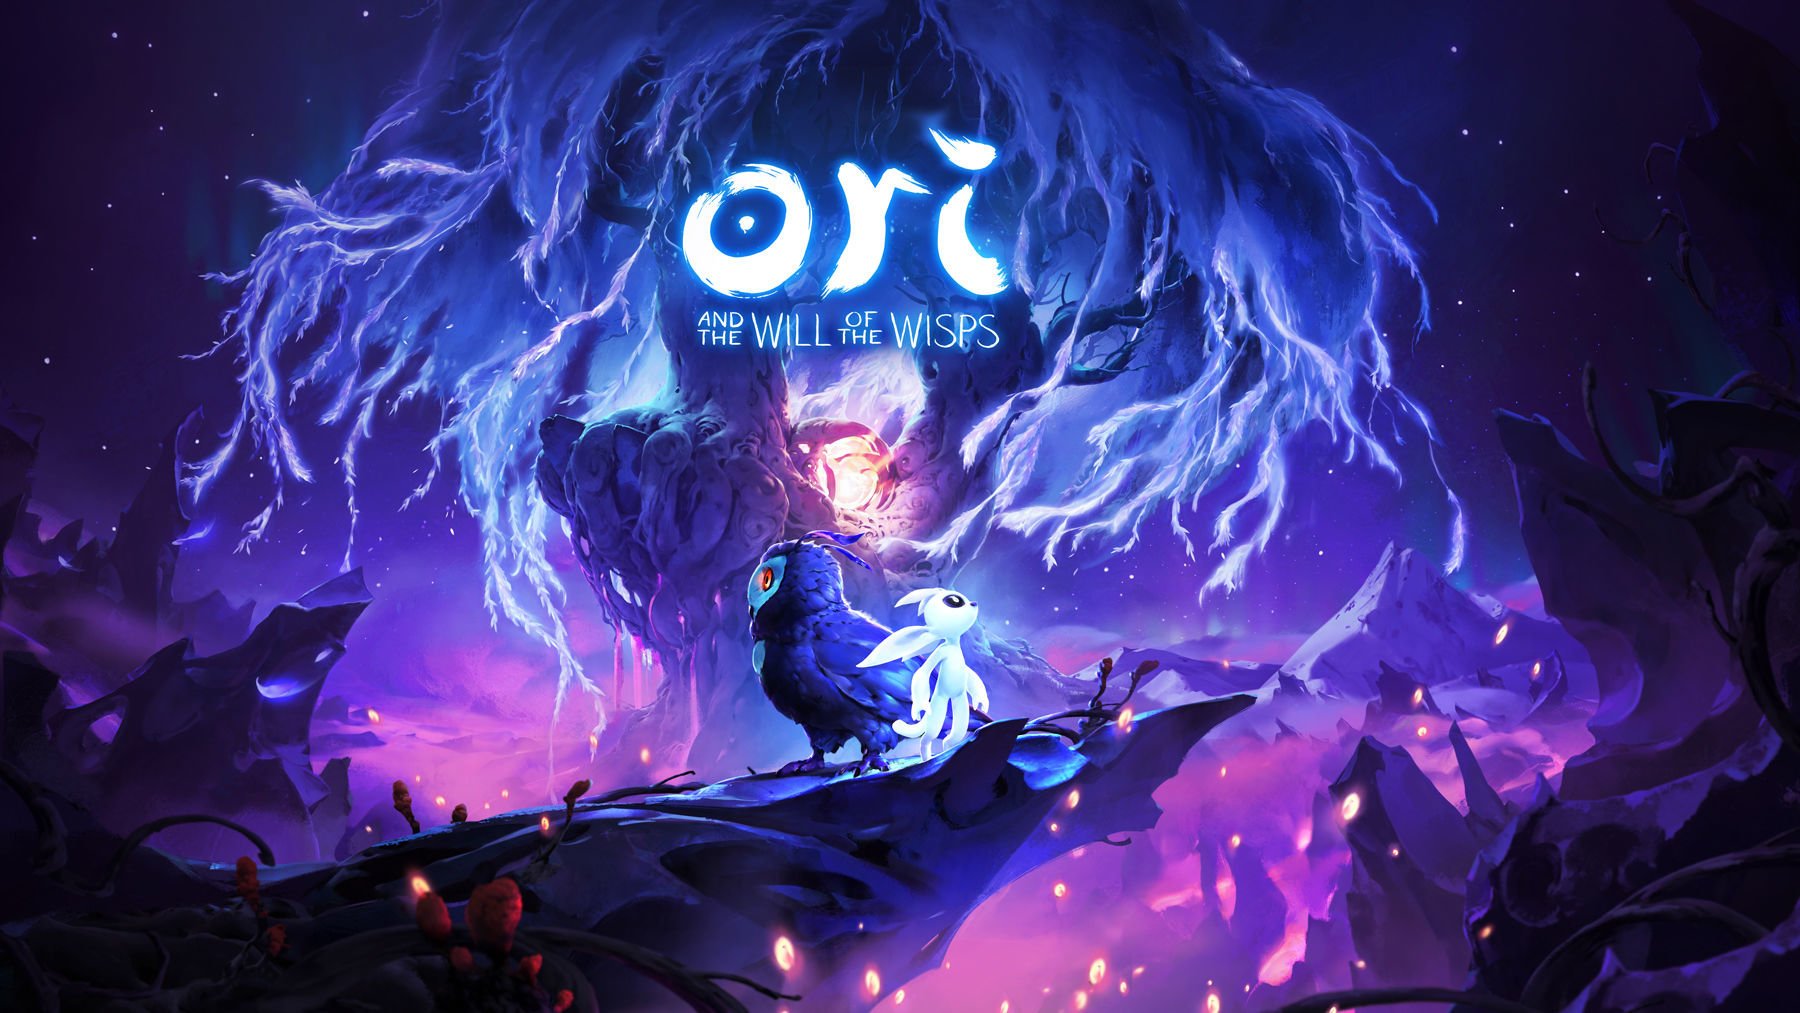 Dark pictures anthology | ori and the will of the wisps na bgs 2019 | dims 2 | notícias